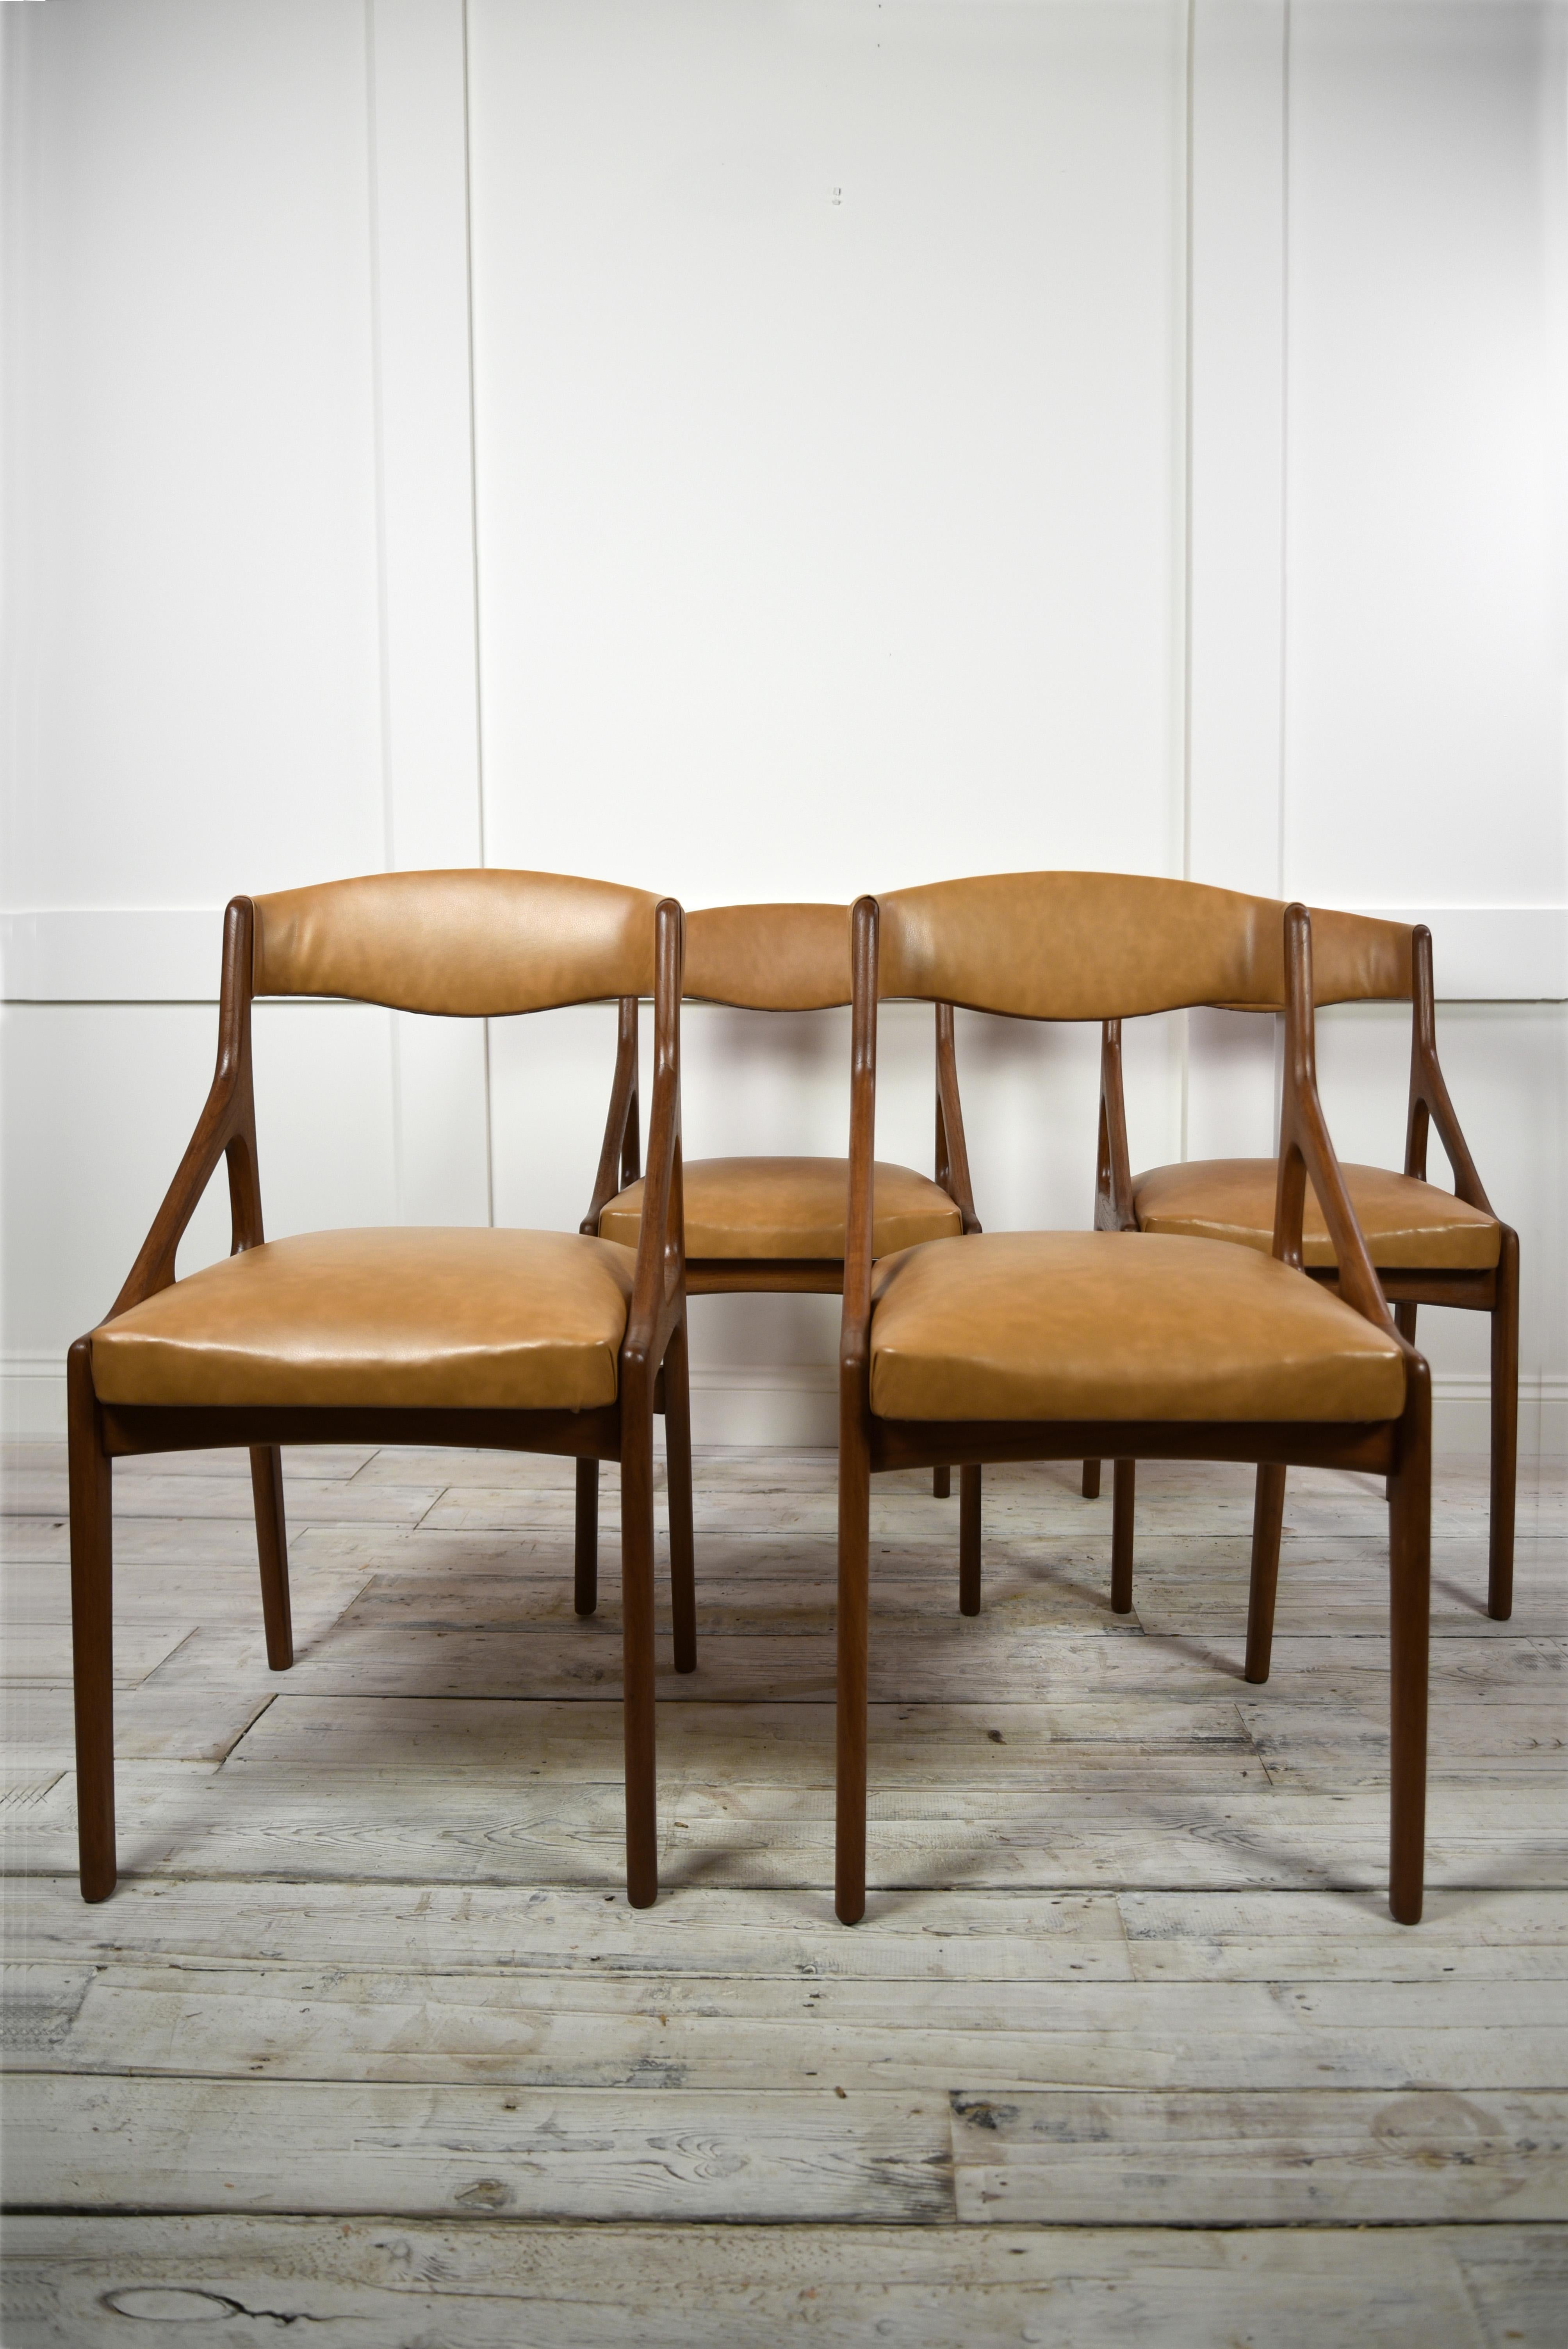 A set of four midcentury modern dining chairs, crafted from high-quality teak wood and luxurious tan Leatherette upholstery. These chairs were made in Italy circa 1960's in the style of renowned designer Kai Kristainsen designs, known for his iconic